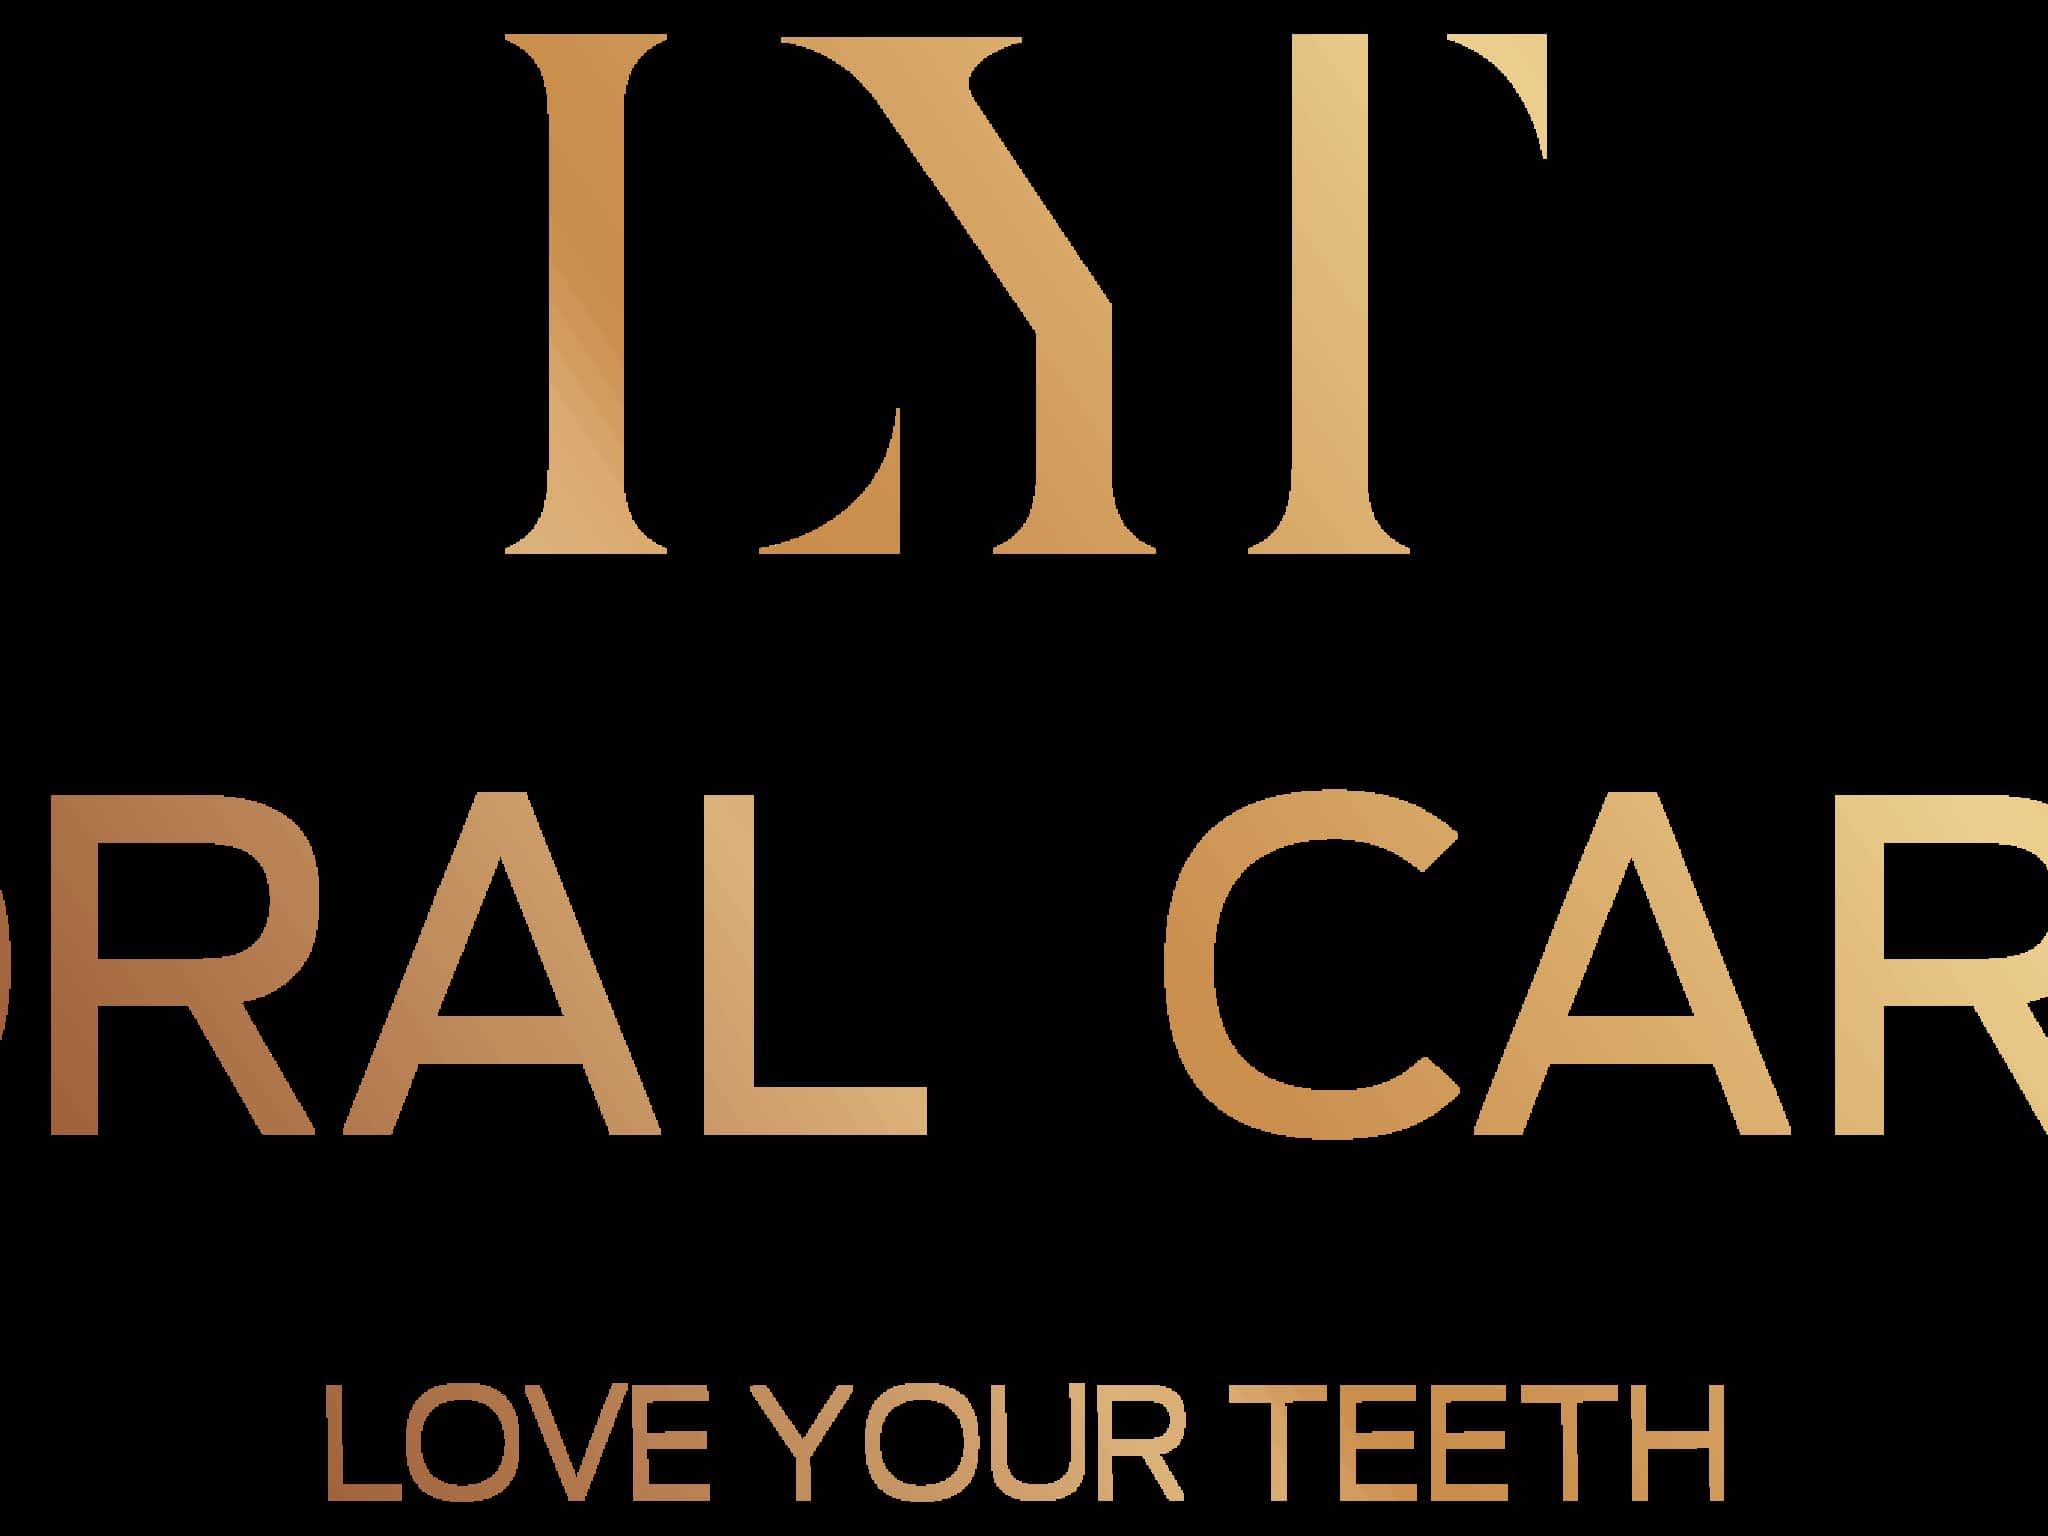 photo LYT Oral Care